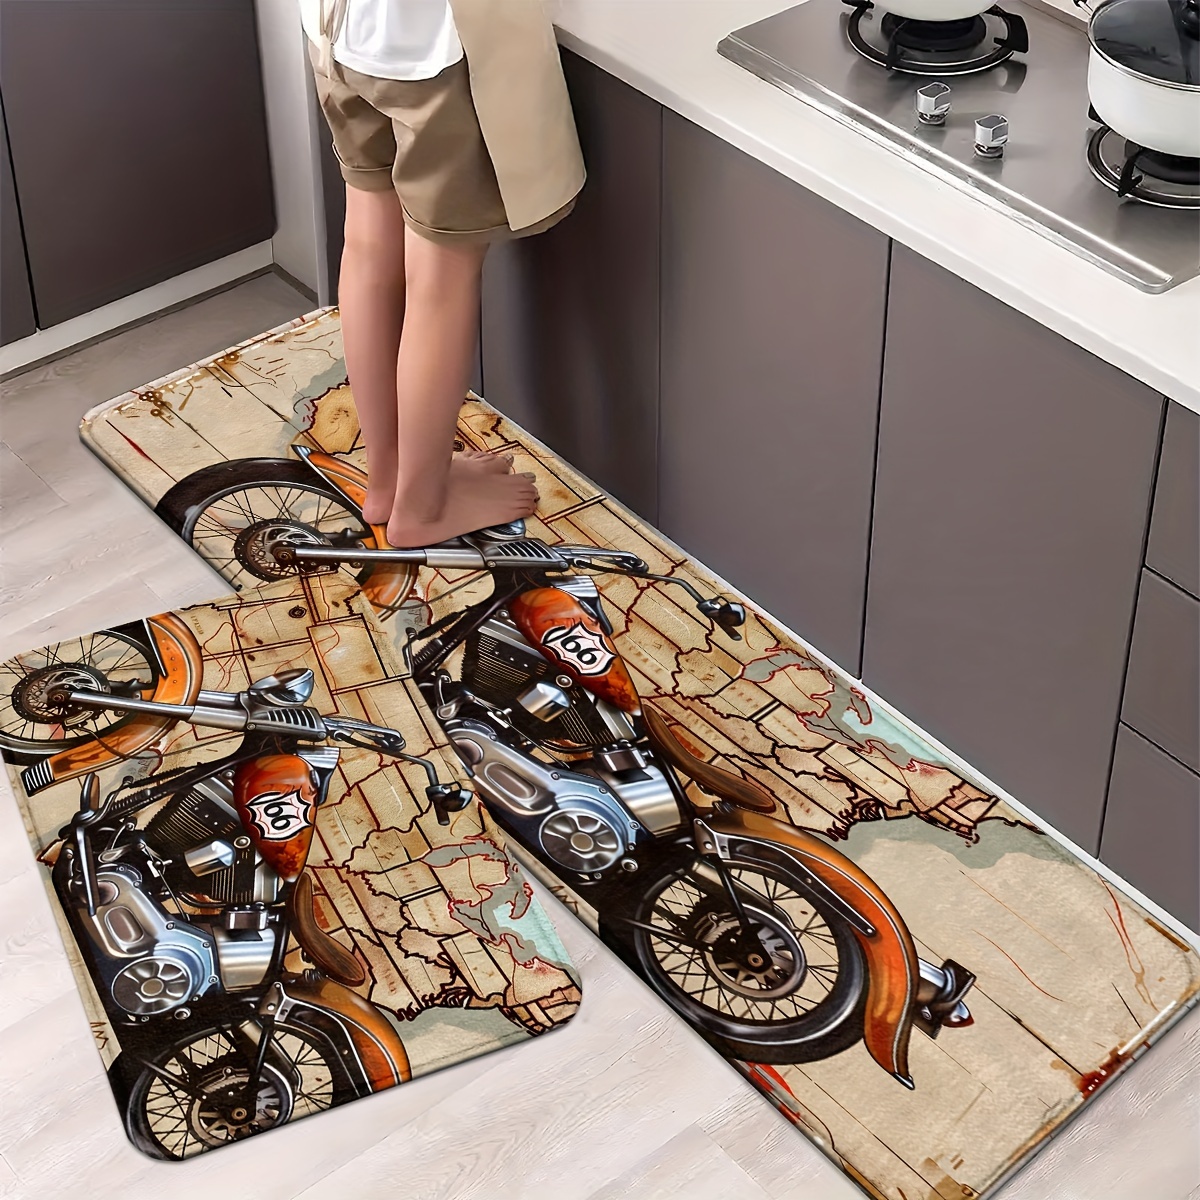 

1/2pcs, Motorcycles And Route 66 Kitchen Rugs Non Slip Washable Thicken Kitchen Mat Kitchen Carpet Rugs For Kitchen Floor Kitchen Mats For Floor Kitchen Rugs Non Slip Kitchen Runner